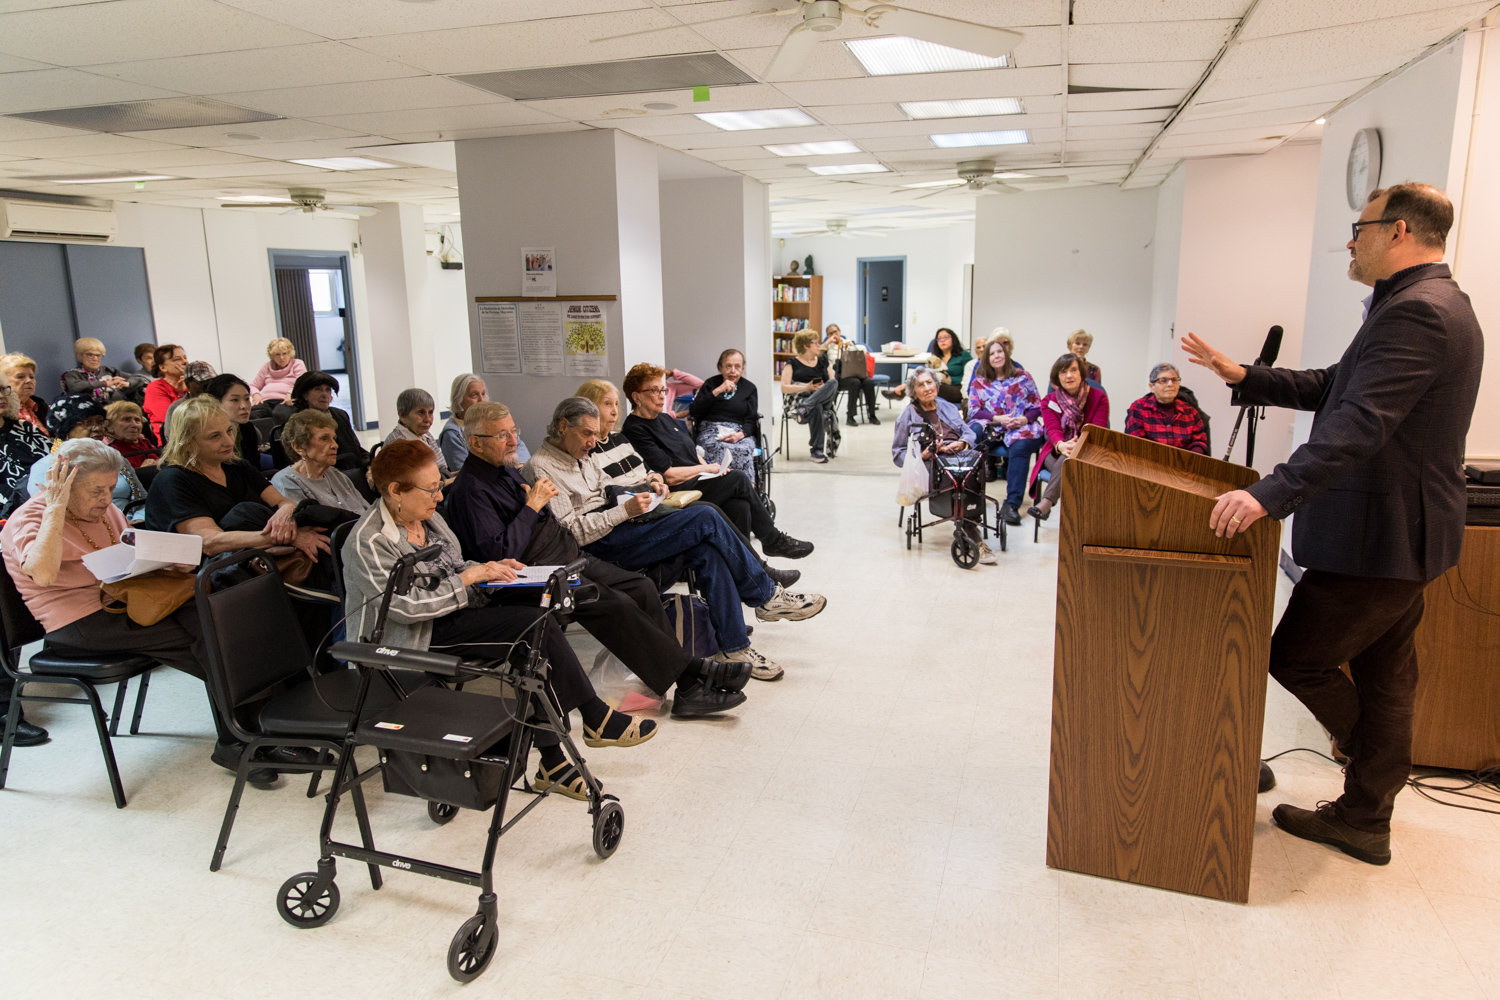 A Feb. 7 appearance by Councilman Andrew Cohen at RSS-Riverdale Senior Services packed the Netherland Avenue space as he sought to hear from neighbors about his legislative efforts downtown.